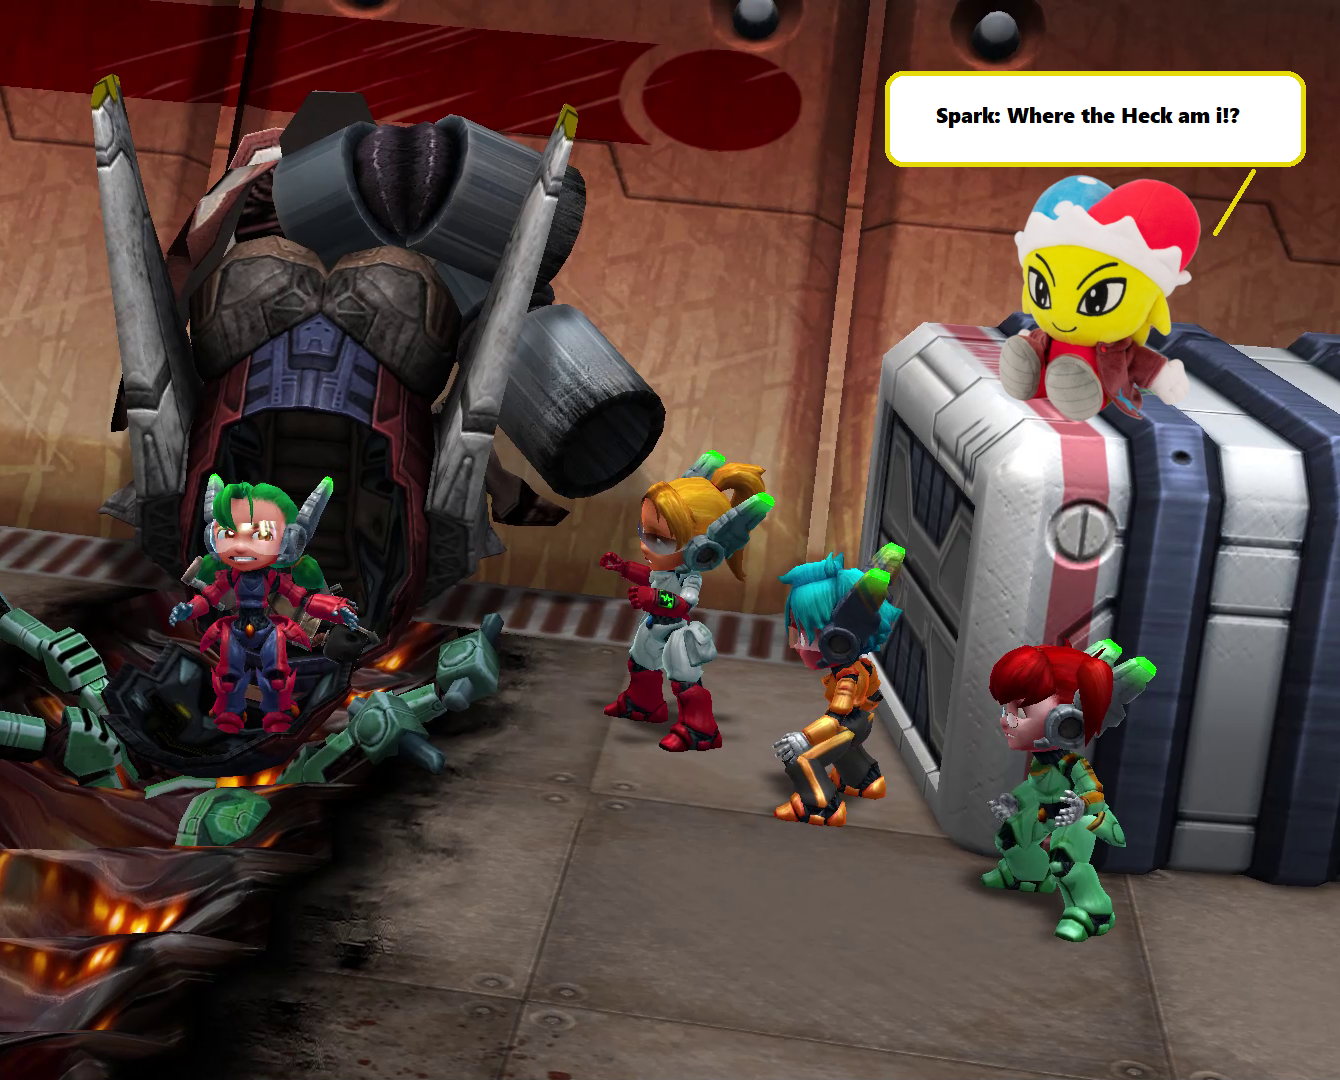 Assault Android Cactus+ (@AndroidCactus) / X